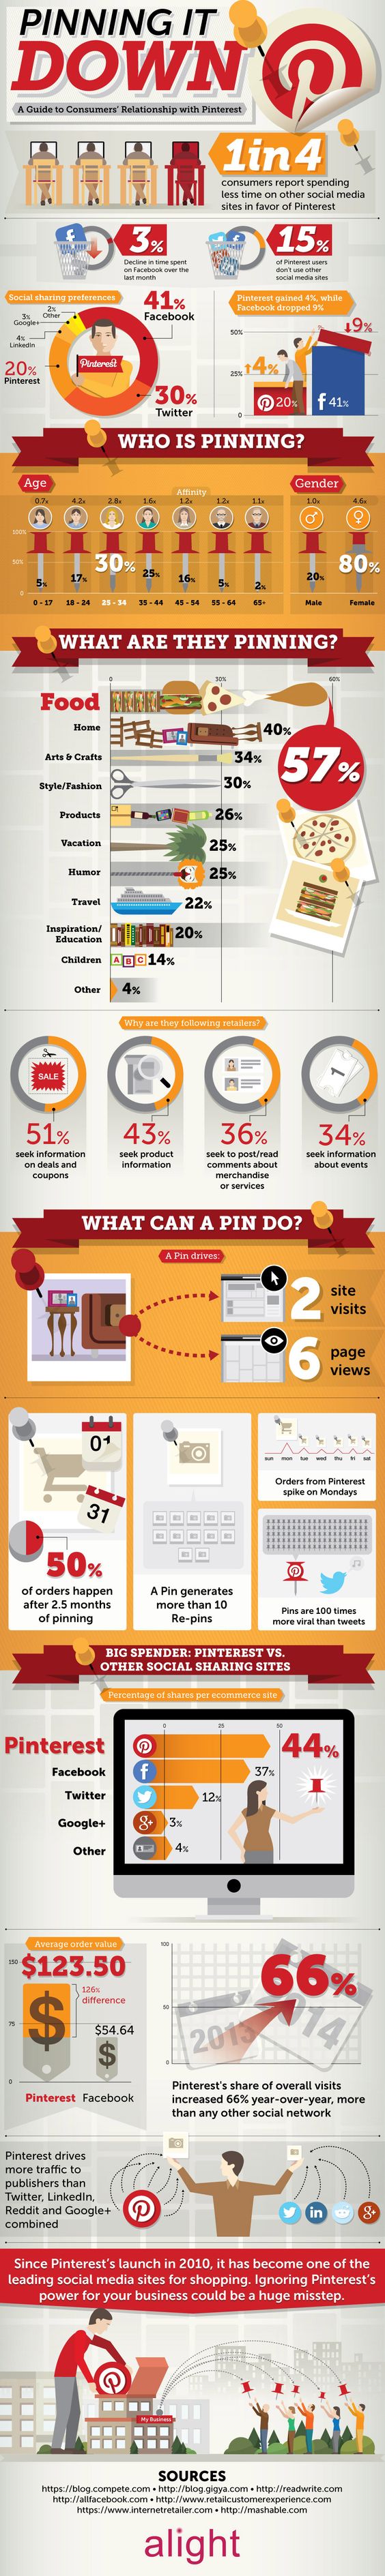 A Guide to Consumers’ Relationship with #Pinterest